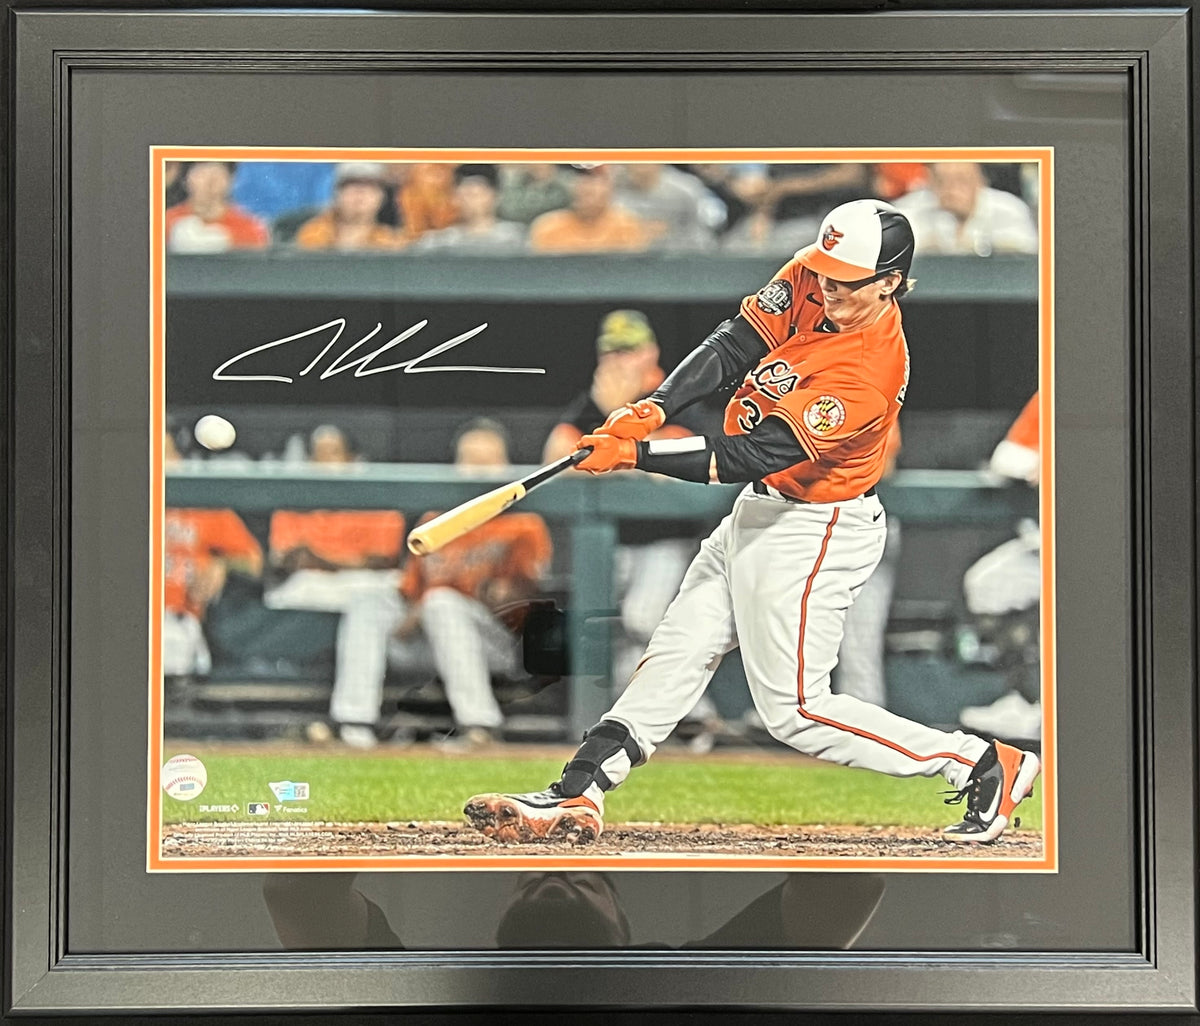 Great Moments, Inc. - Baltimore Orioles #1 Draft Pick, Adley Rutschman,  autographed baseballs now in stock in both locations! You can also get them  at greatmomentsinc.com